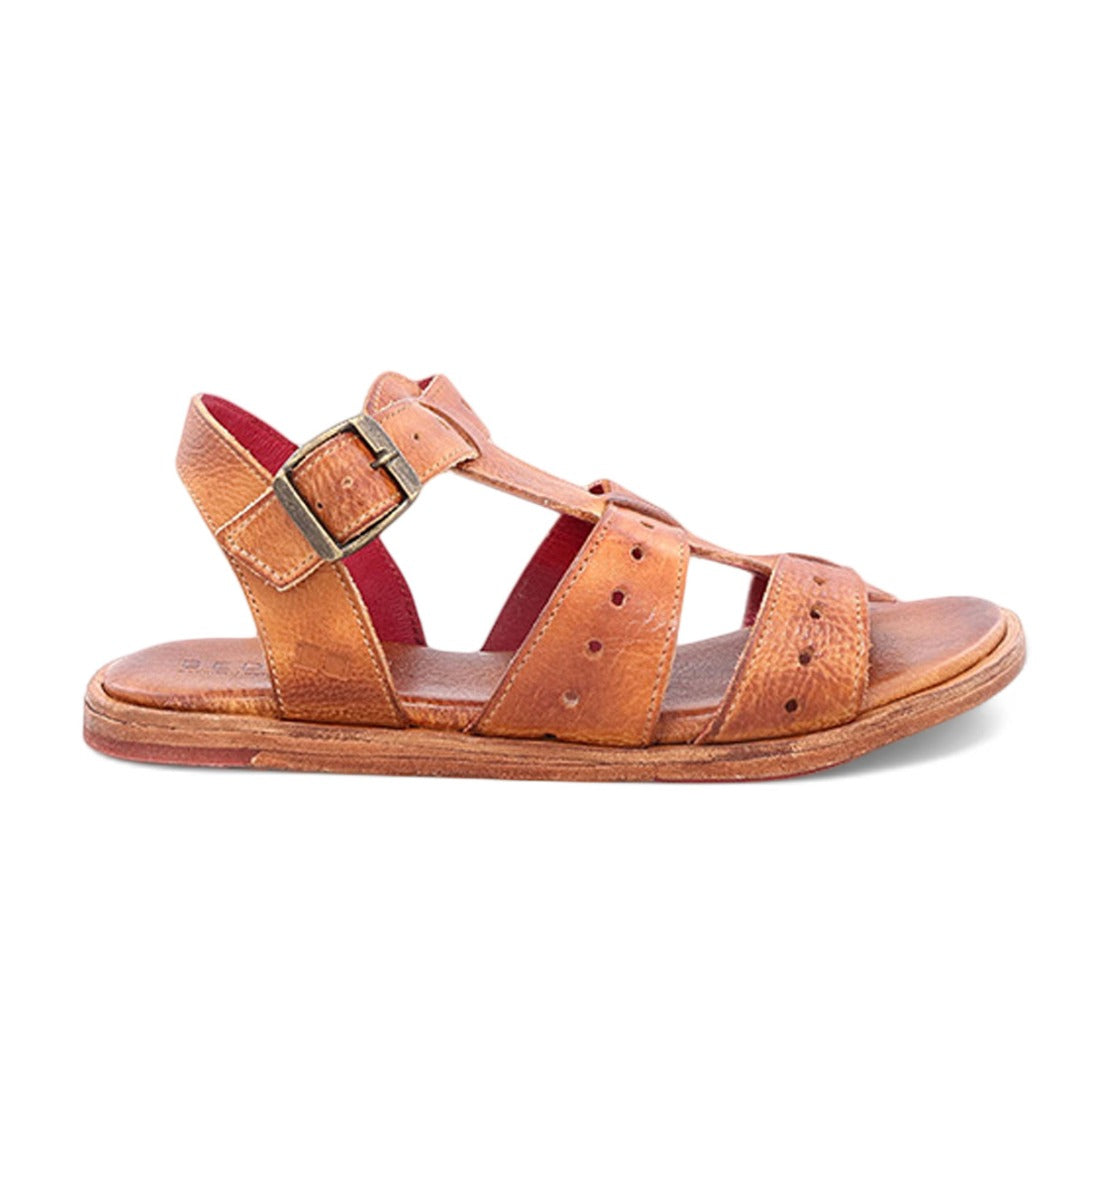 A women's tan sandal with straps and buckles called Sue by Bed Stu.